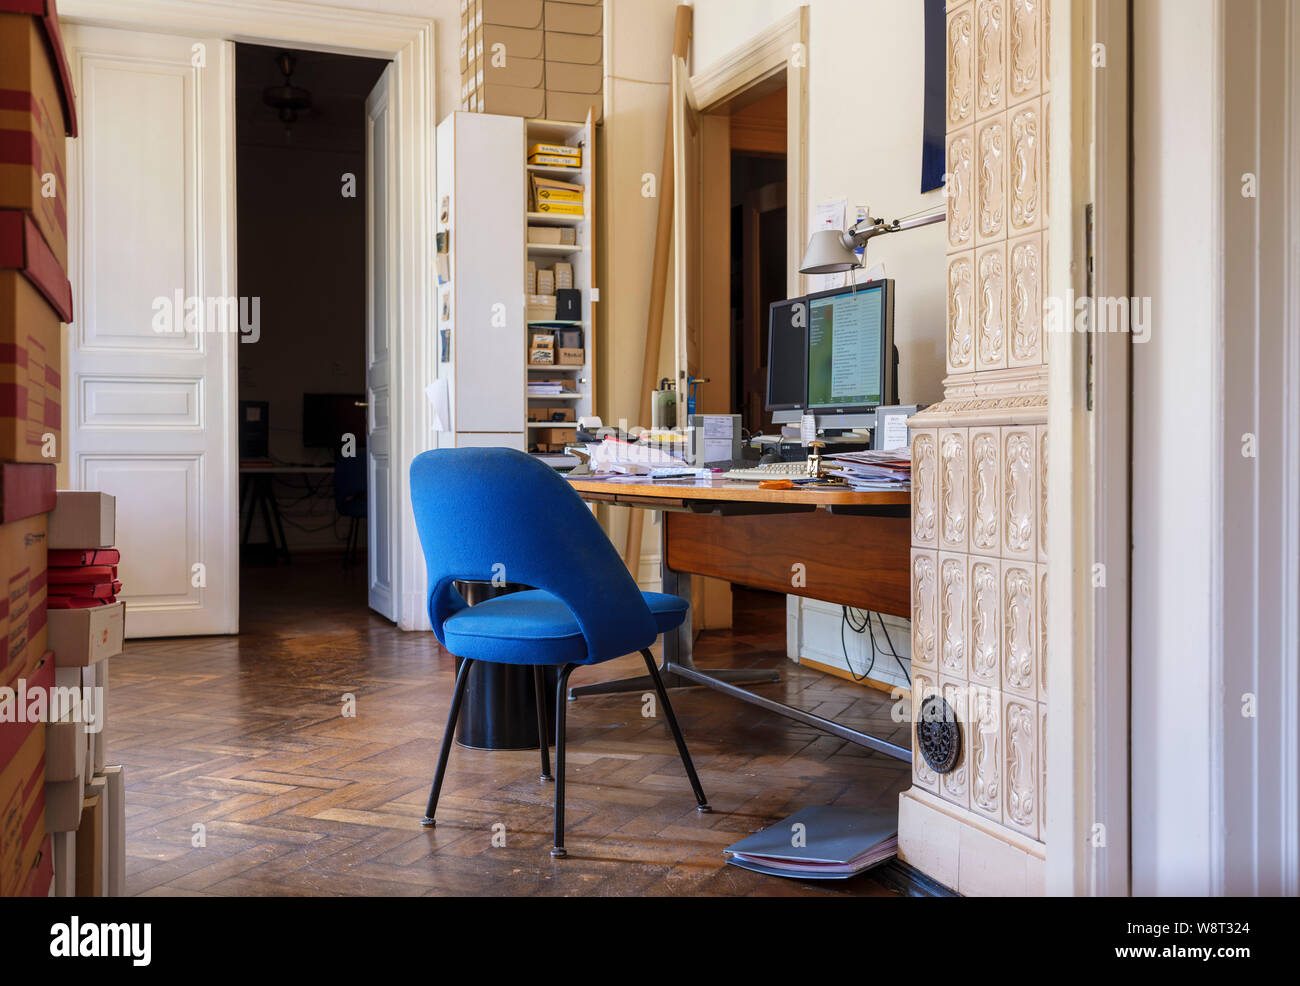 Blue chair, office interior, busy desk, France, Europe, Stock Photo